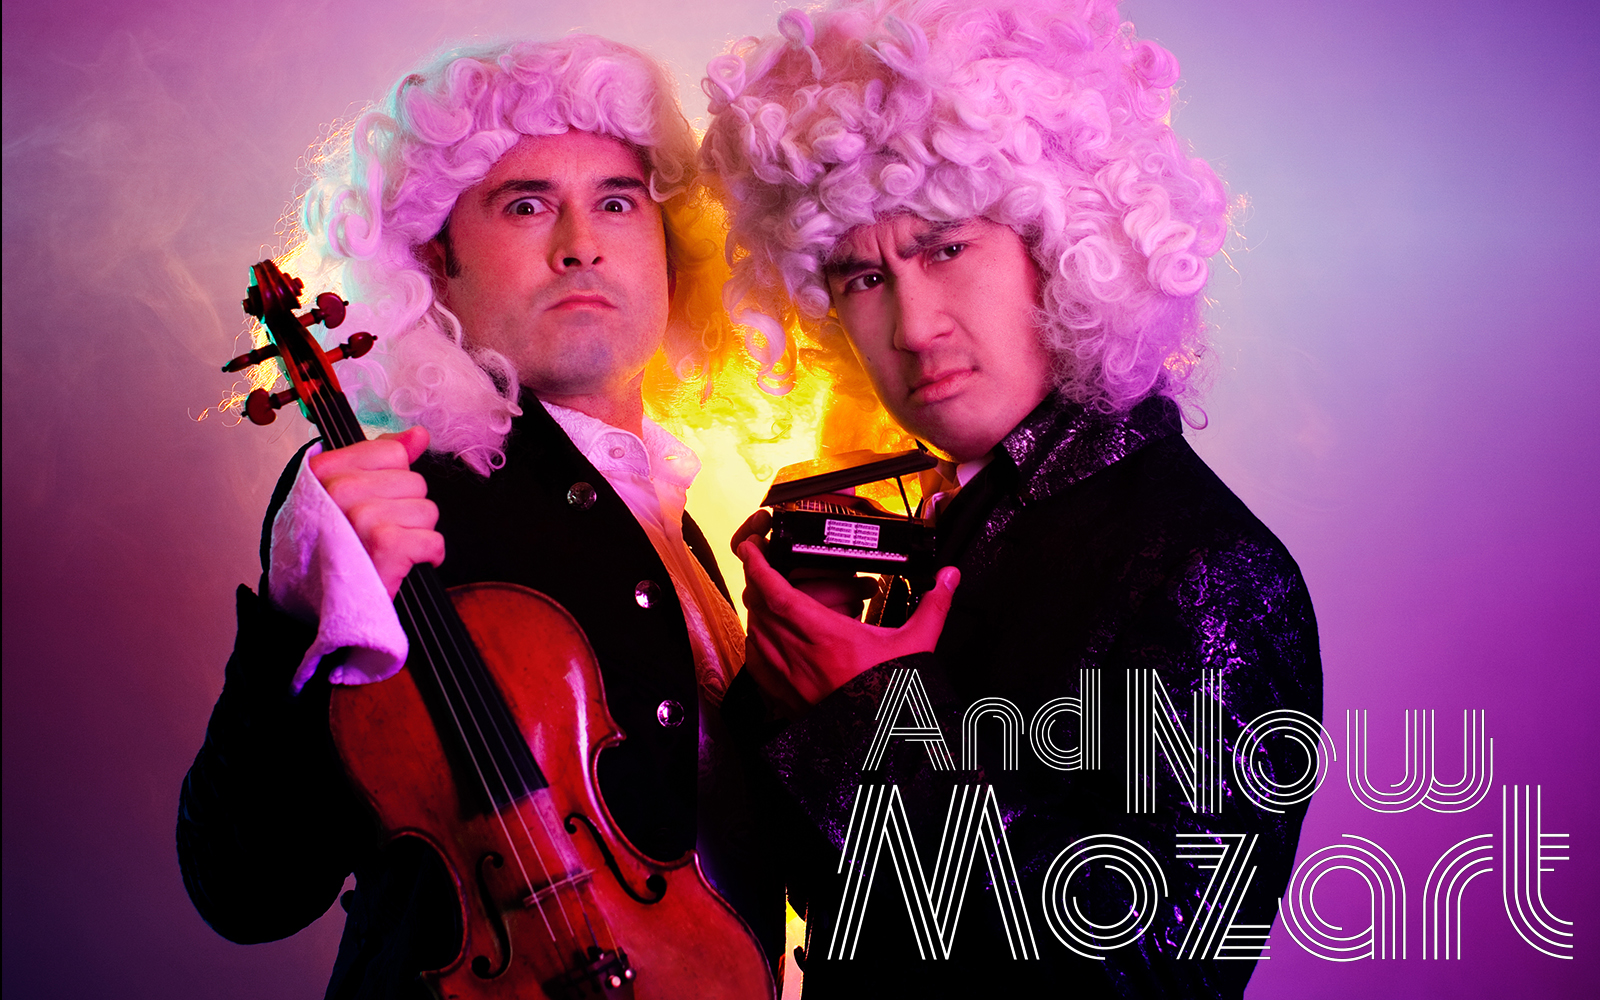 Watch AND NOW MOZART for free!